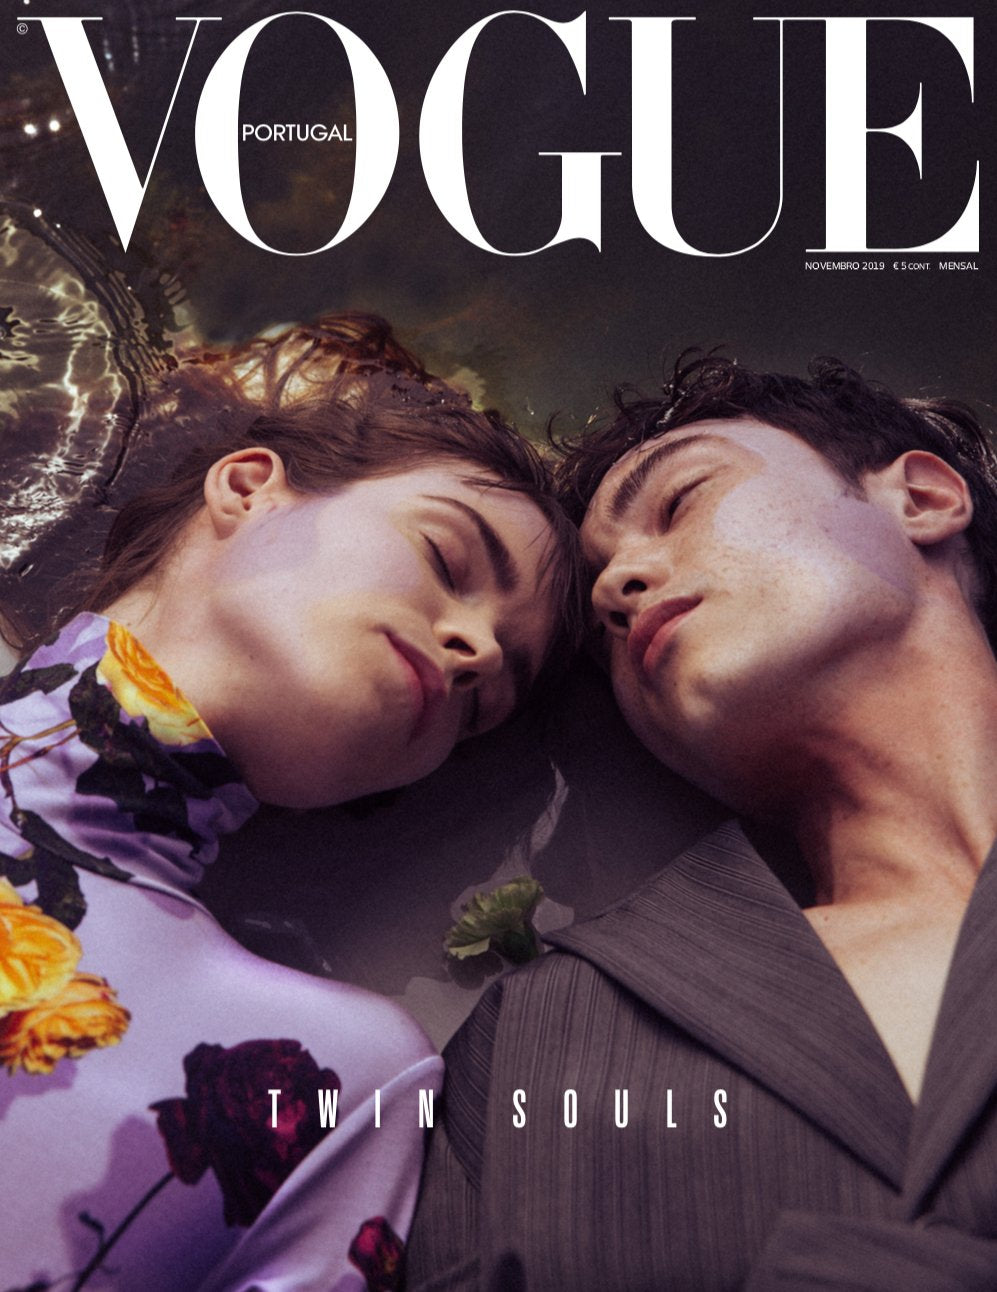 VOGUE PORTUGAL – tagged 